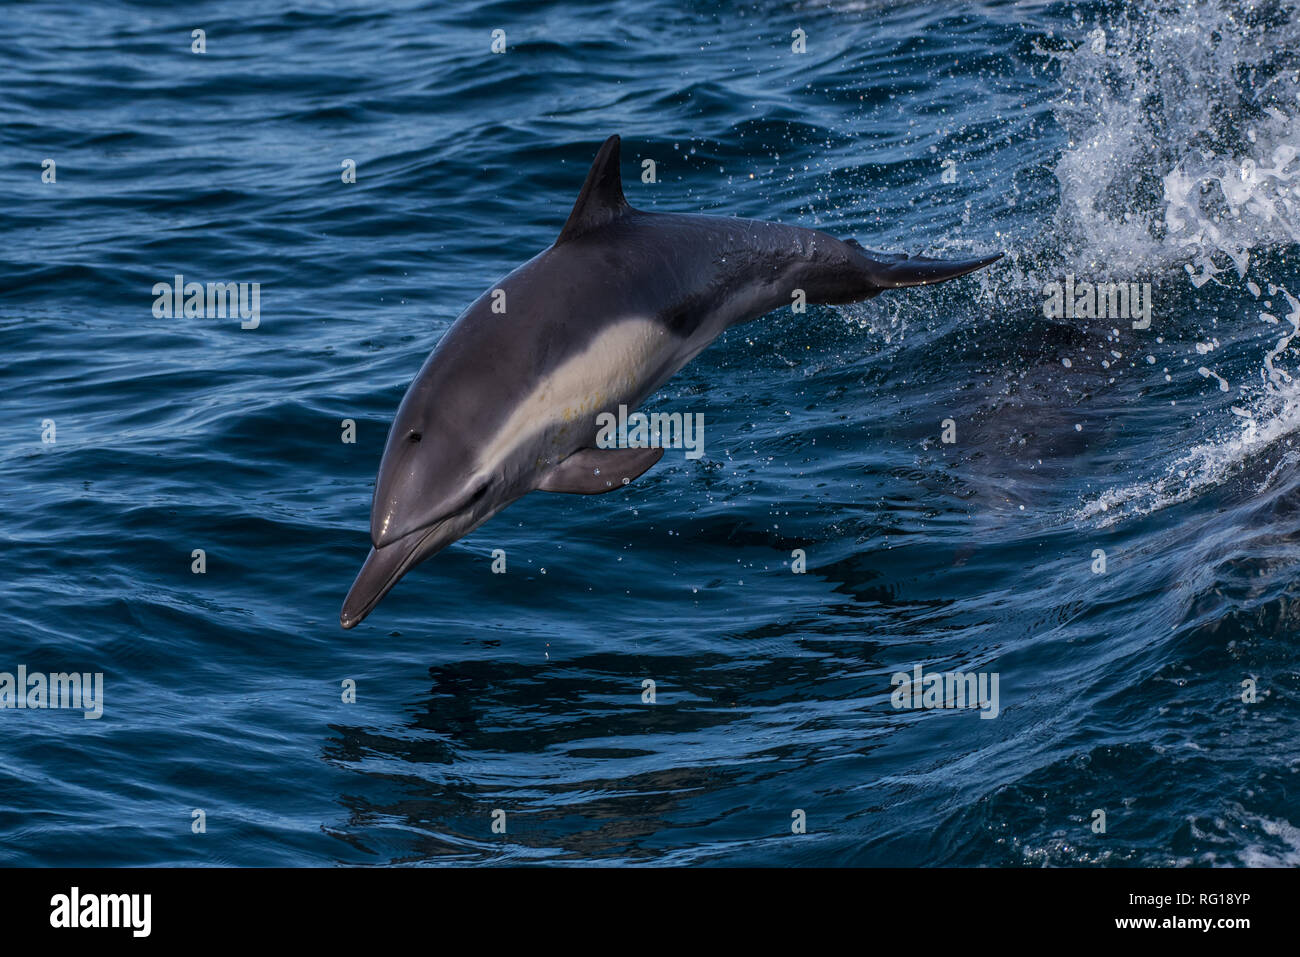 Energetic dolphin playfully jumping with full body completely out of water while swimming at top speed in the Santa Barbara Channel. Stock Photo